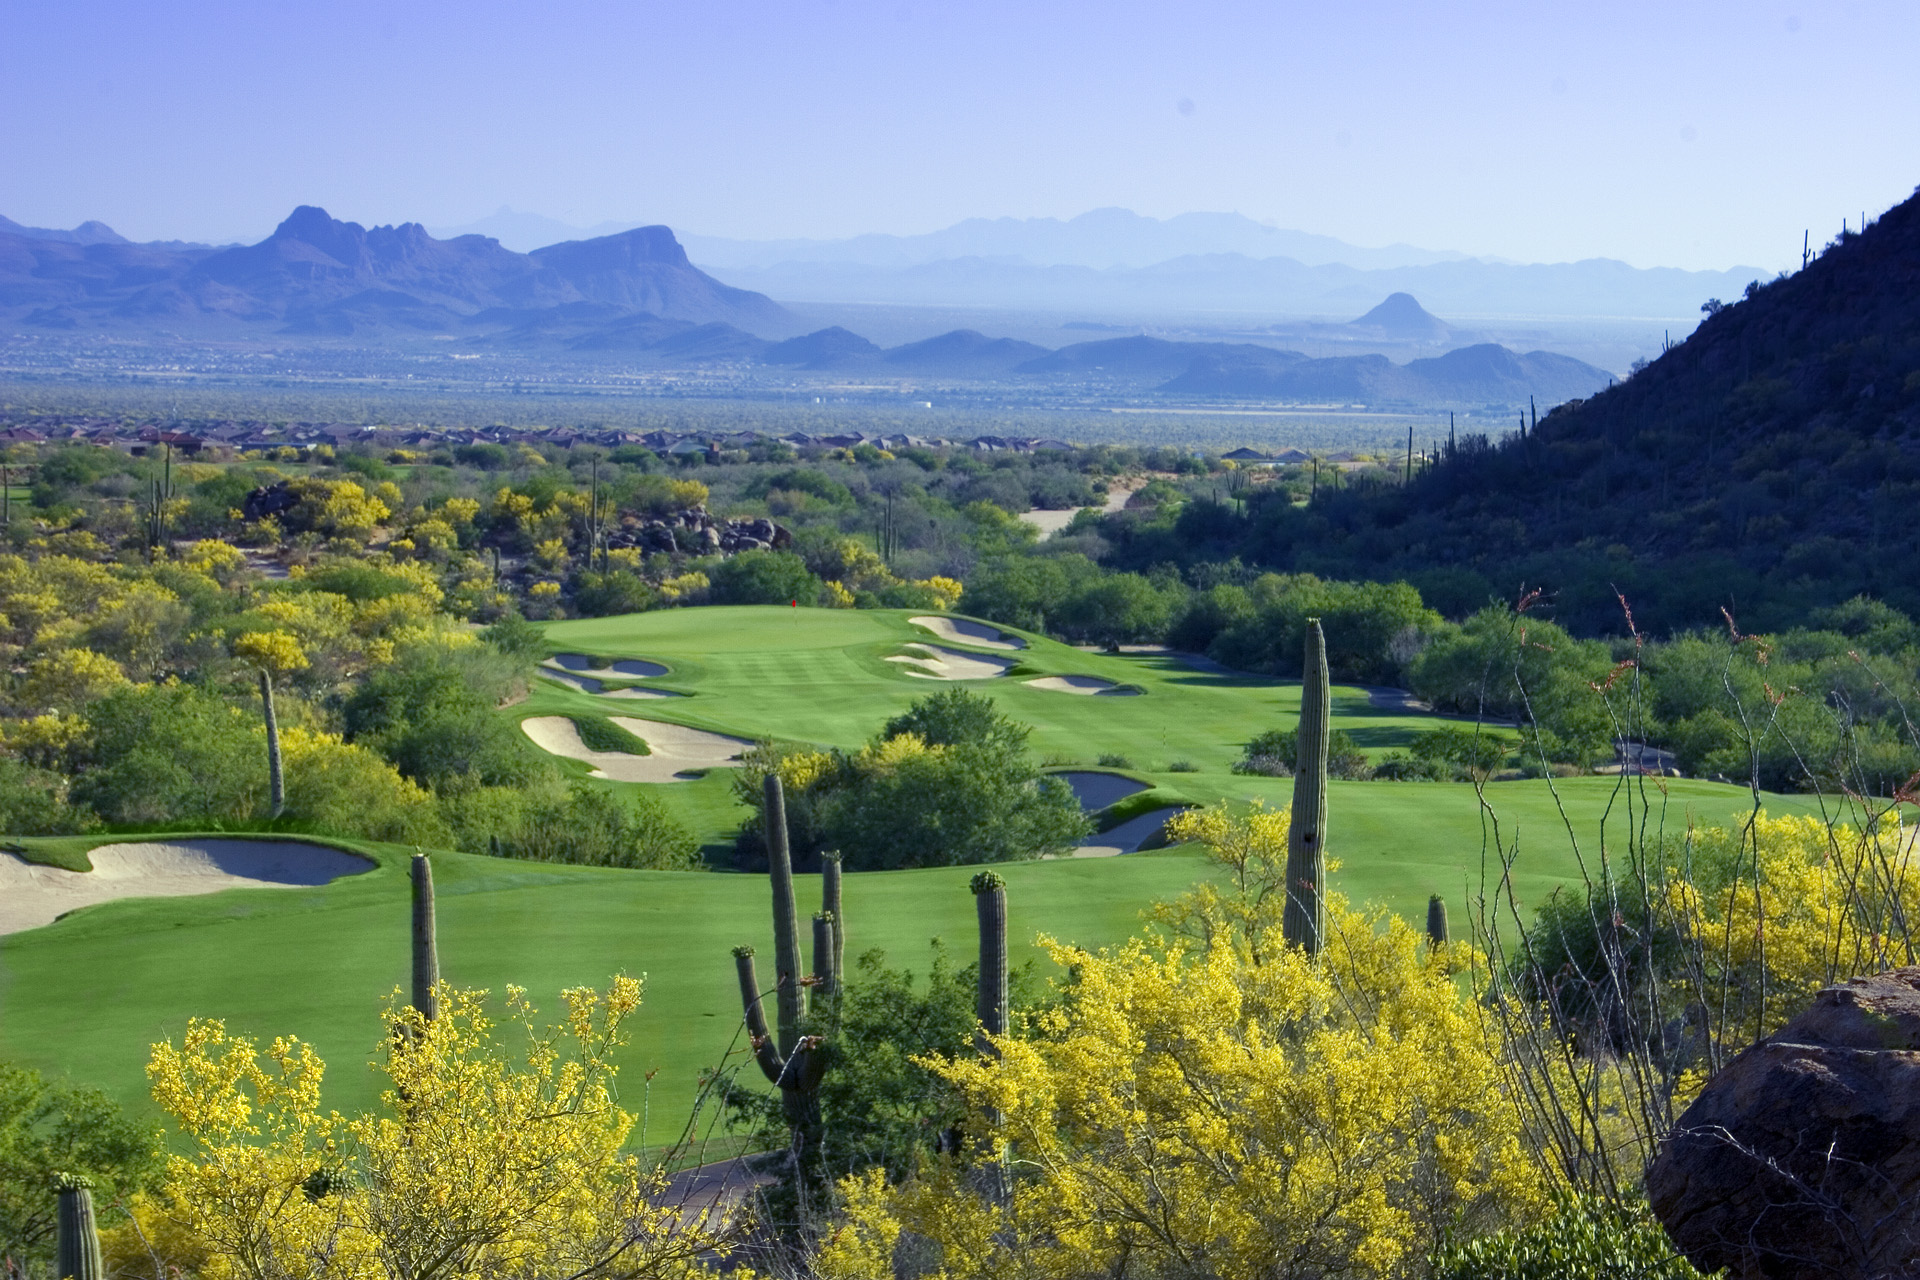 The Golf Course In Tucson Arizona With Homes Background